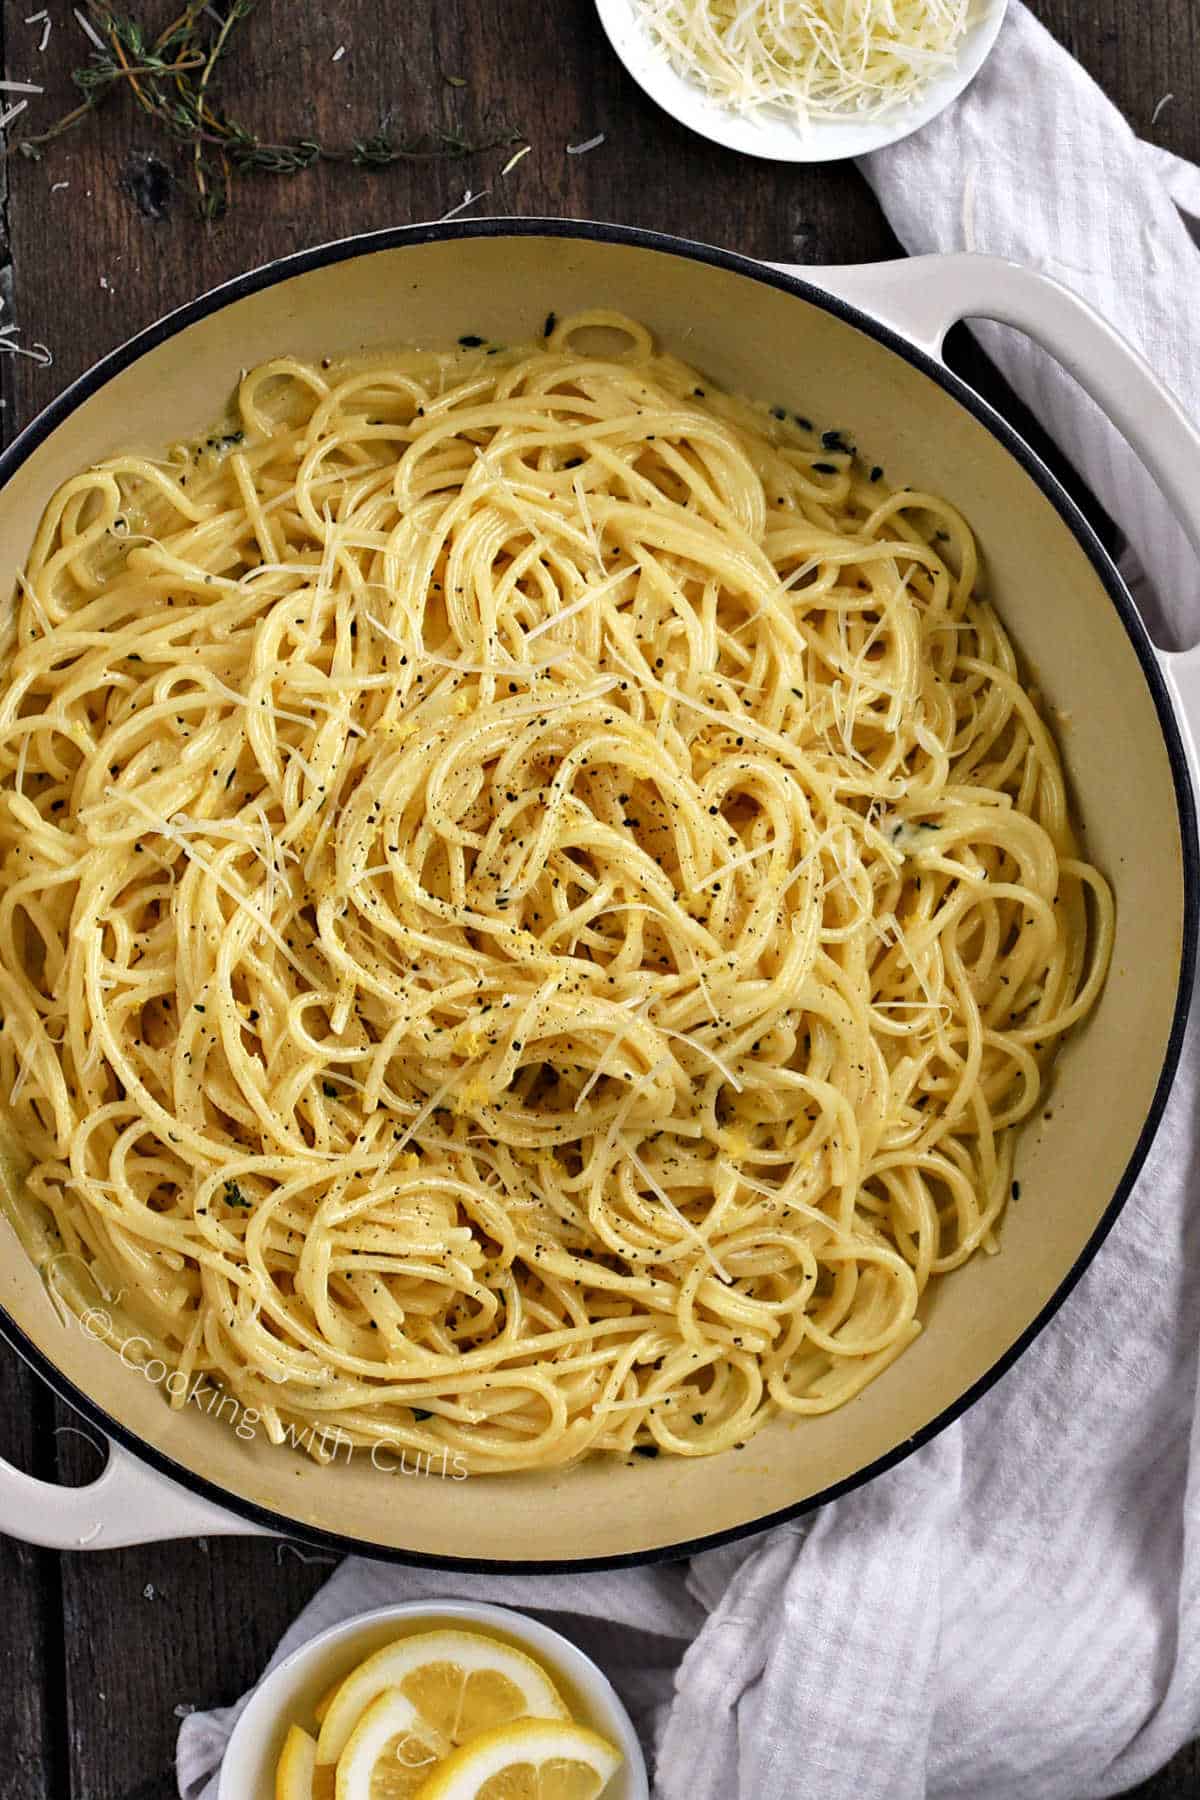 Looking down on spaghetti al limone in a skillet with lemon slices and parmesan cheese in bowls on the side.